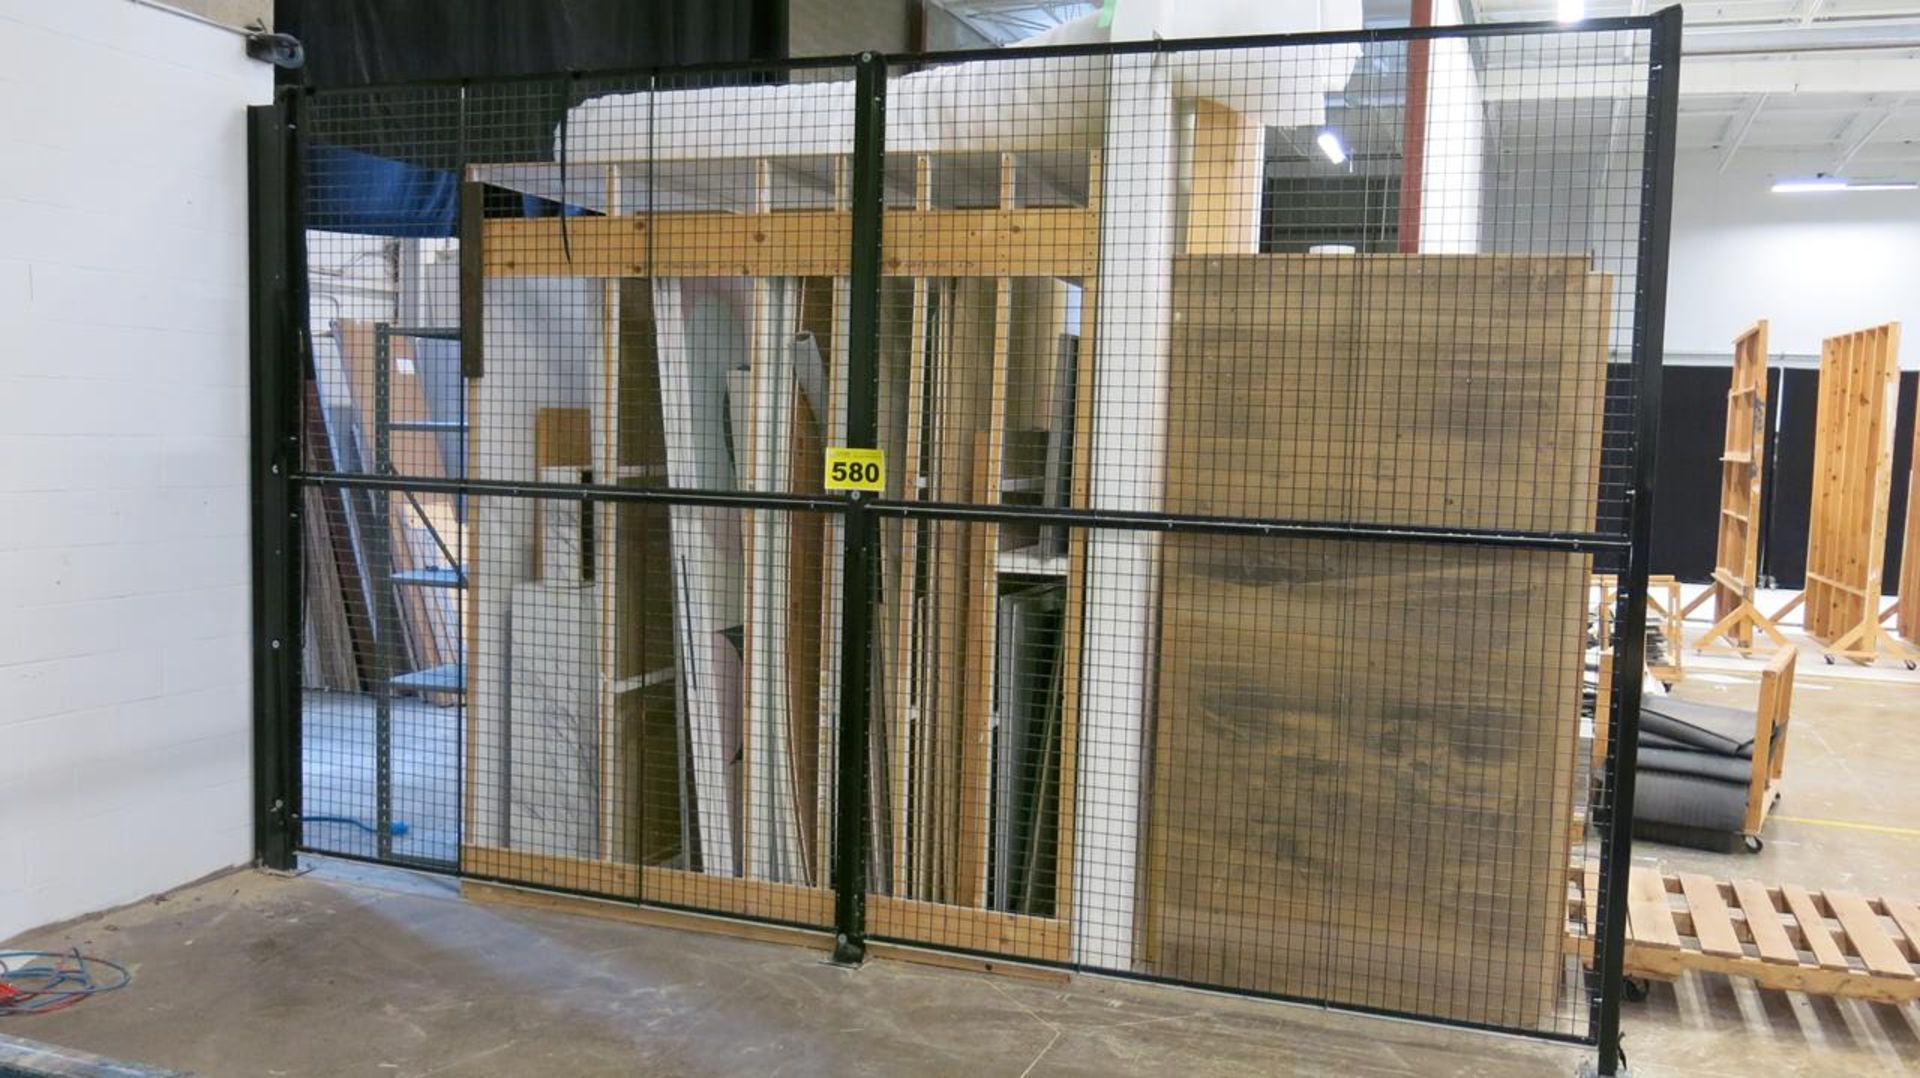 BLACK METAL DIVIDING WALL WITH (2) BLACK ROLLING ACCESS GATES, 640' LONG, 10' HIGH (COMPRISED OF (